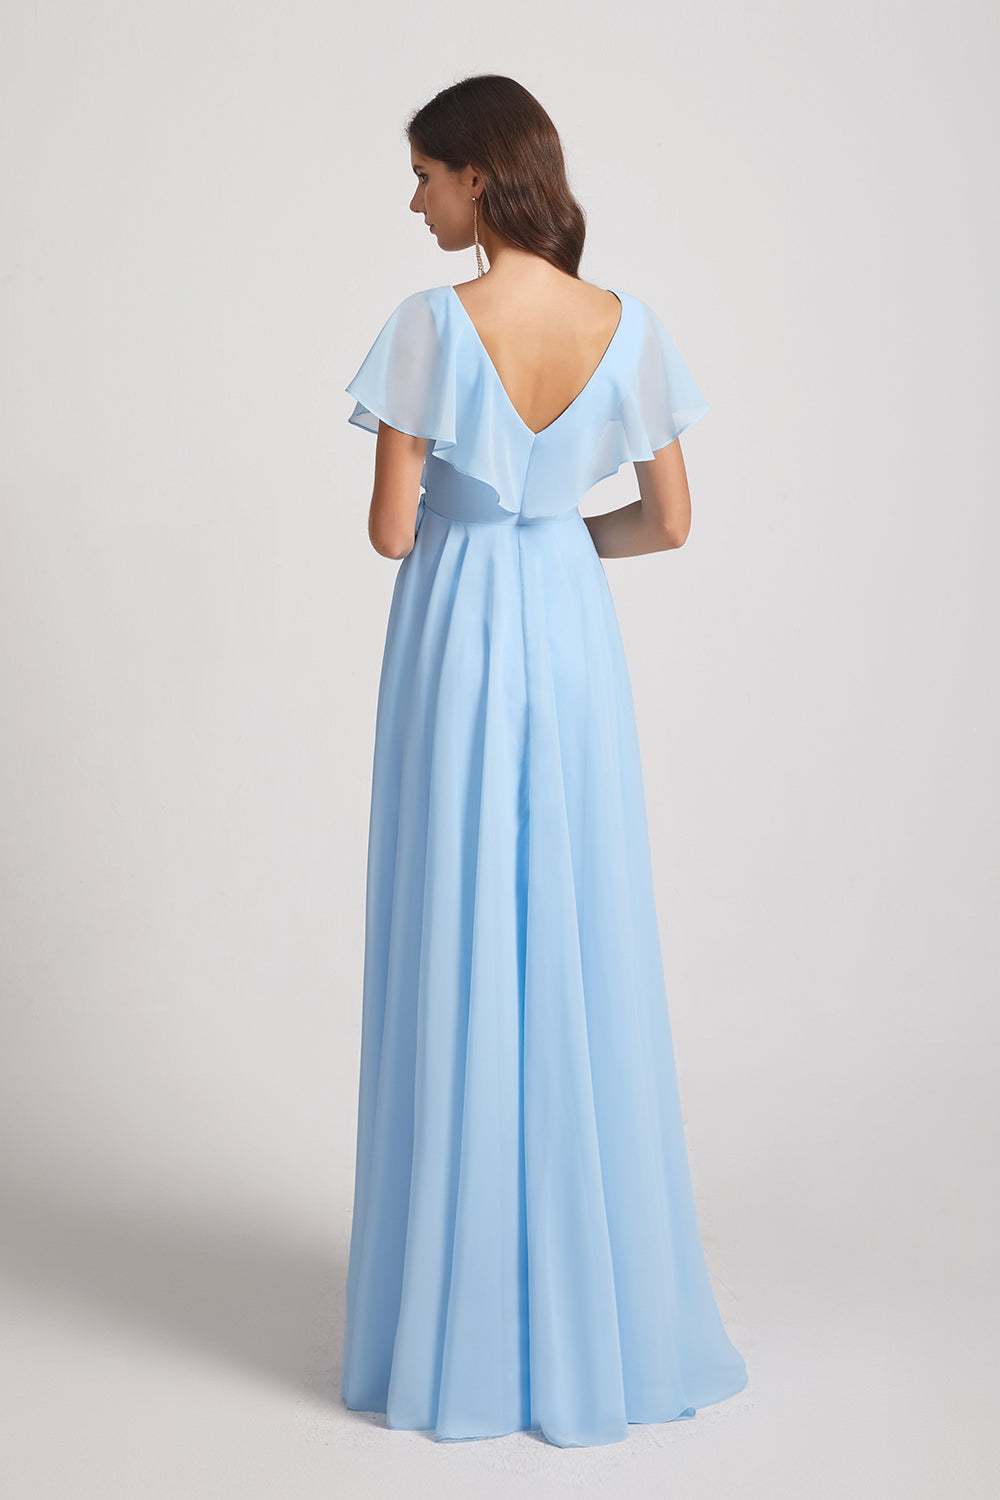 v-back chiffon ruched bridesmaids gown